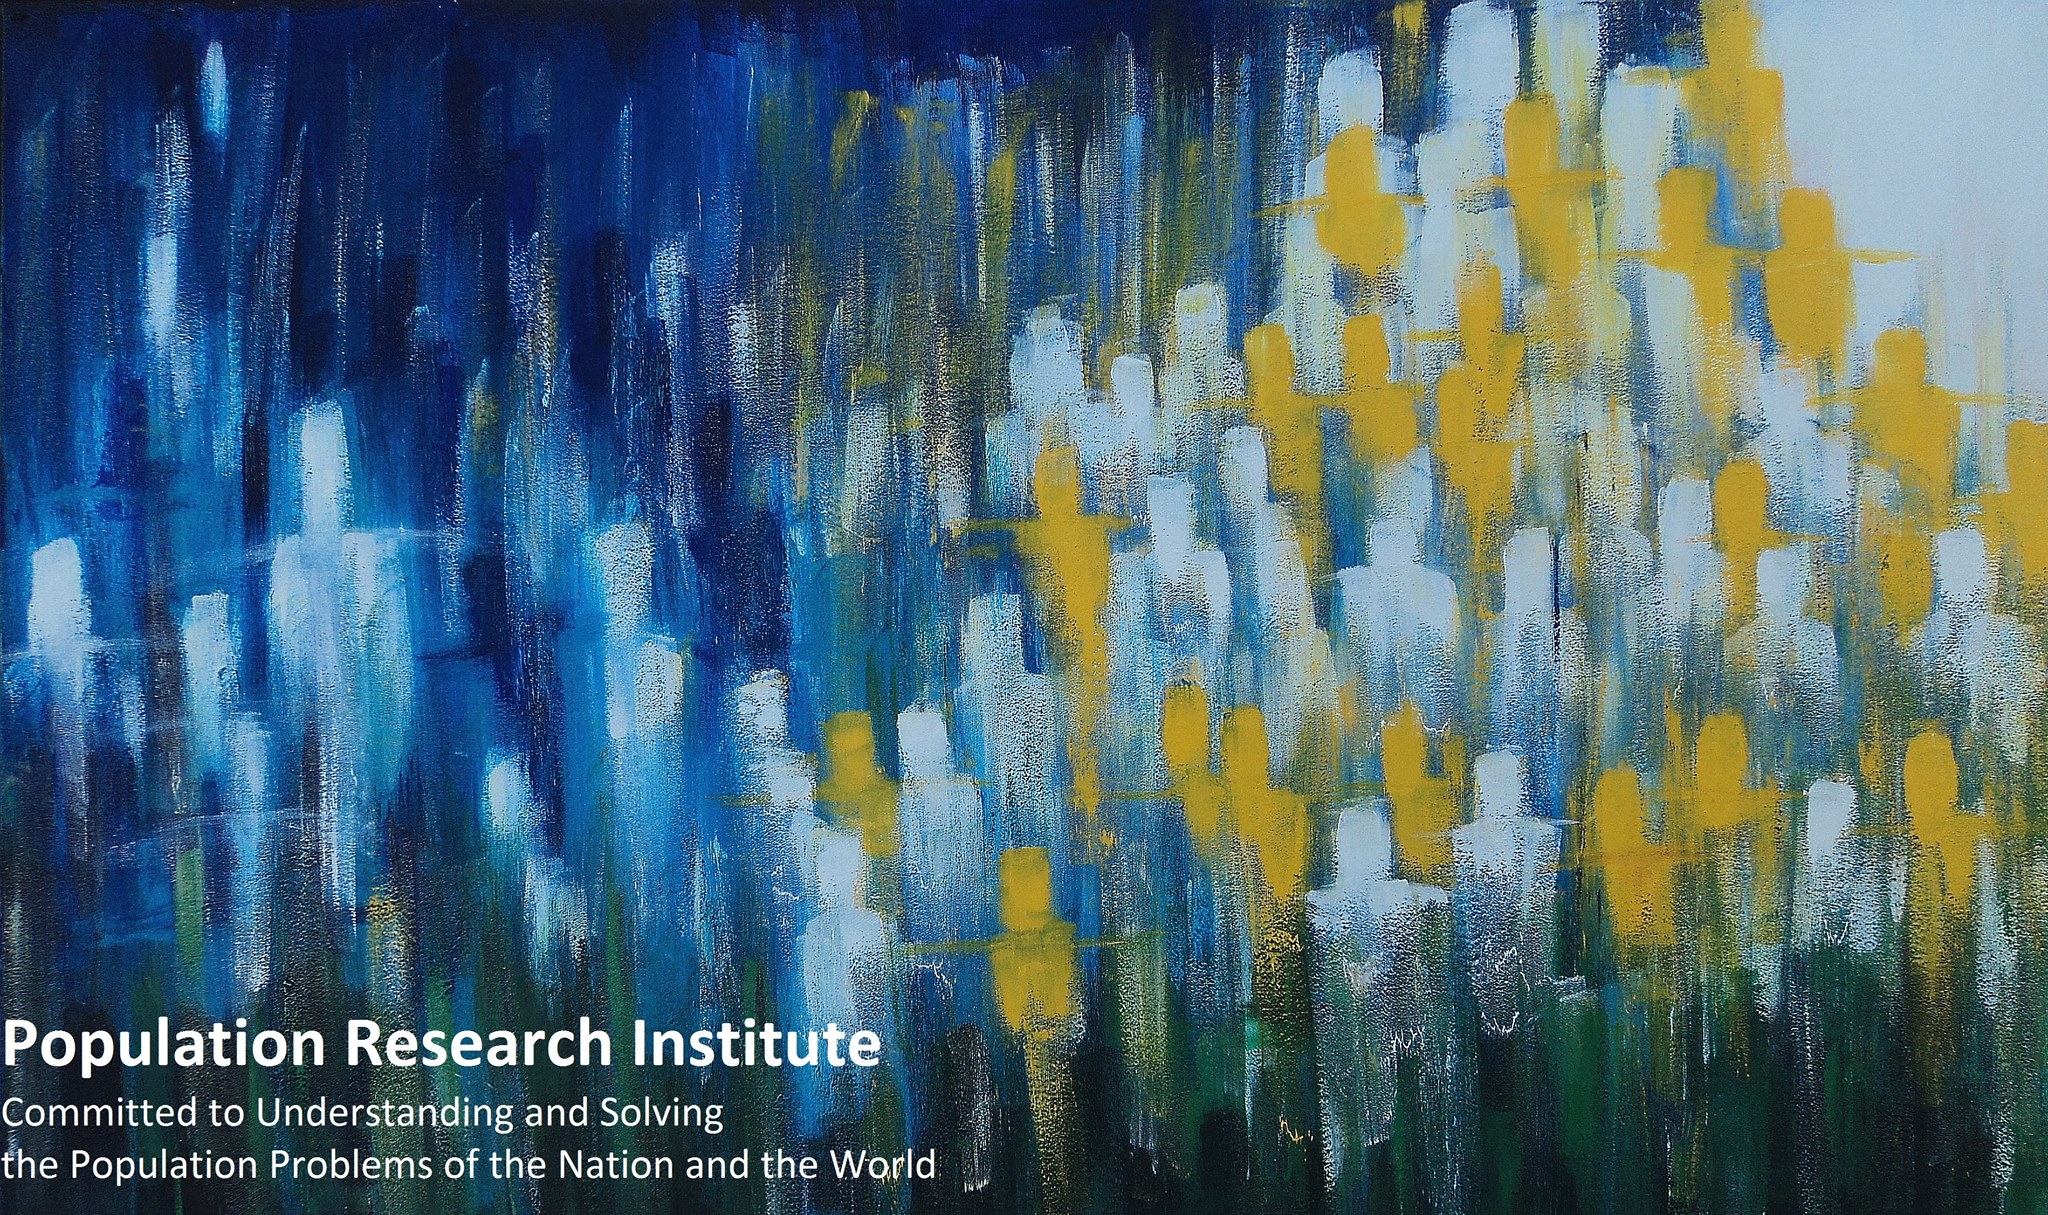 Population Research Institute: Committed to Understanding and Solving the Population Problems of the Nation and the World.